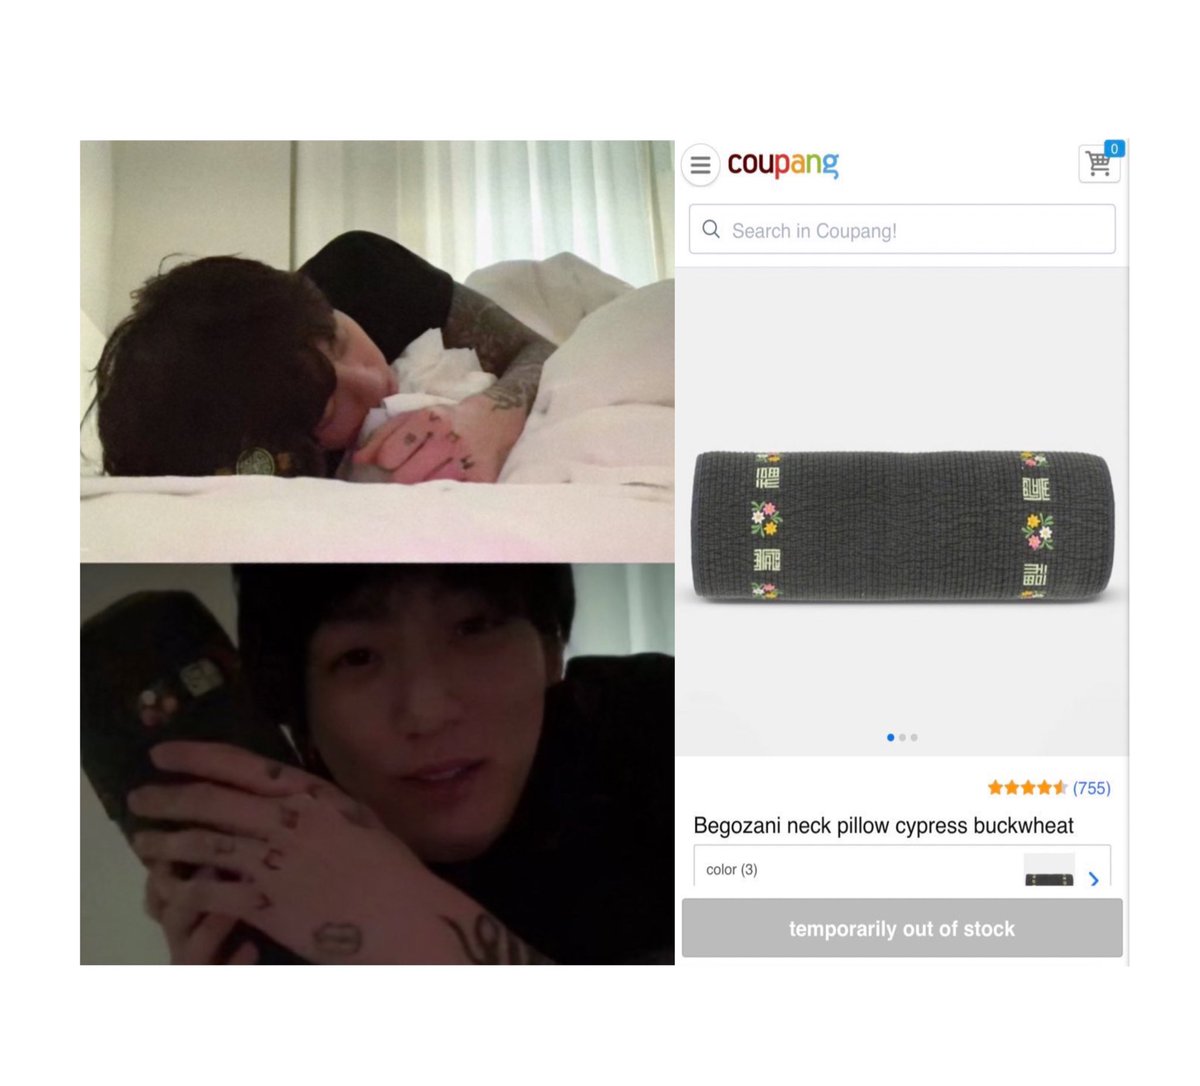 SOLD OUT KING JUNGKOOK STRIKES AGAIN! 

The Begozani neck pillow that Jungkook was using during howhis recent live is now temporarily OUT OF STOCK in Coupang, Korea's largest e-commerce company

I vote #JungKook at #SECAwards for #ArtistaMasculinoInternacional and #LeftAndRight…